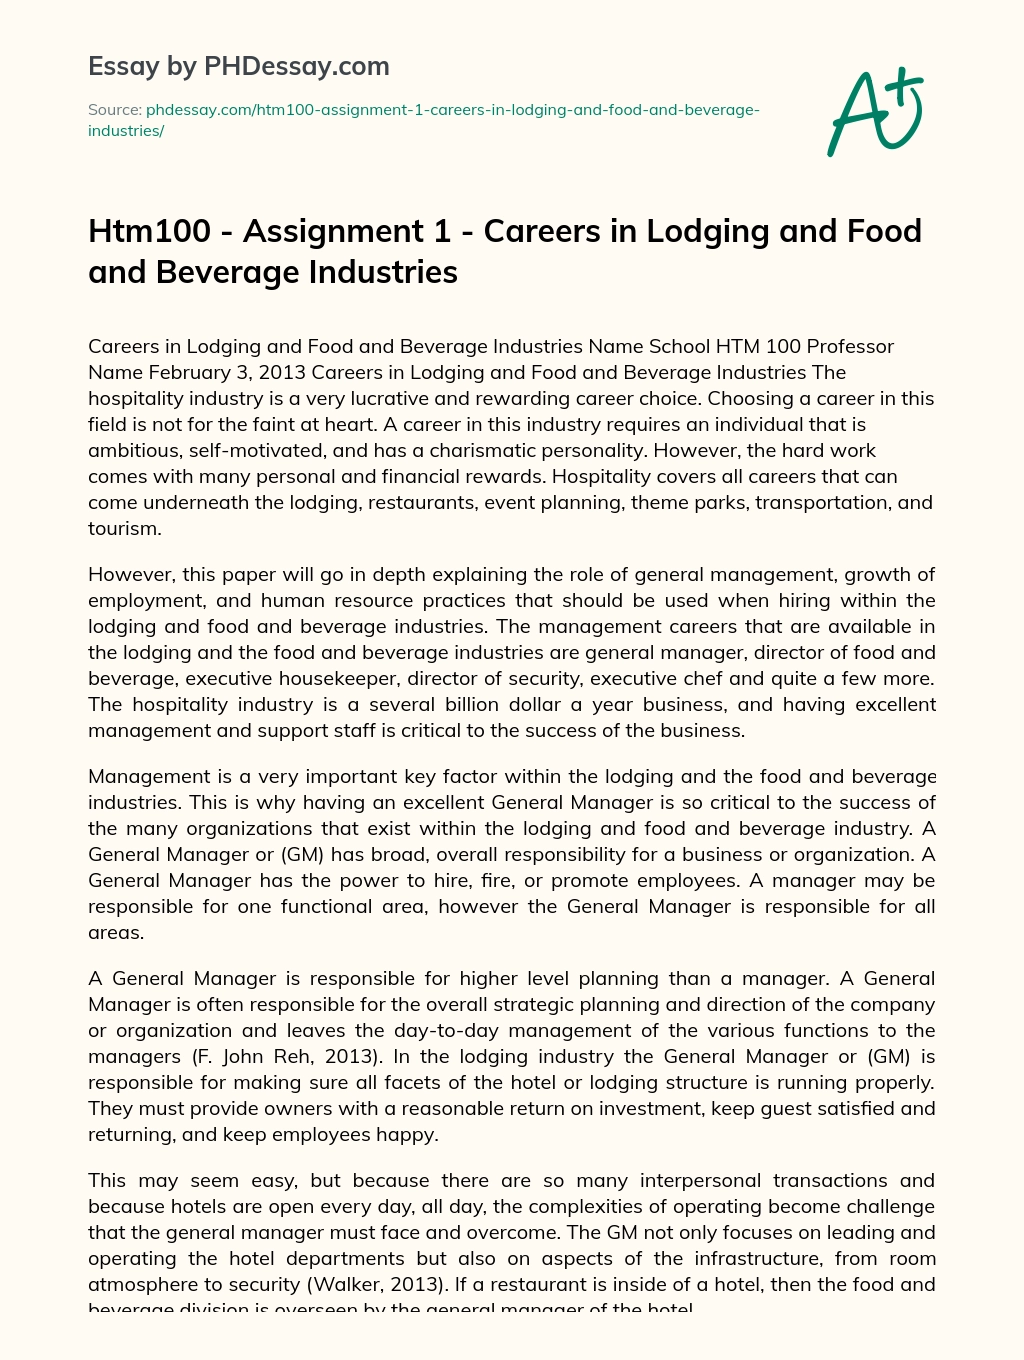 Htm100 – Assignment 1 – Careers in Lodging and Food and Beverage Industries essay